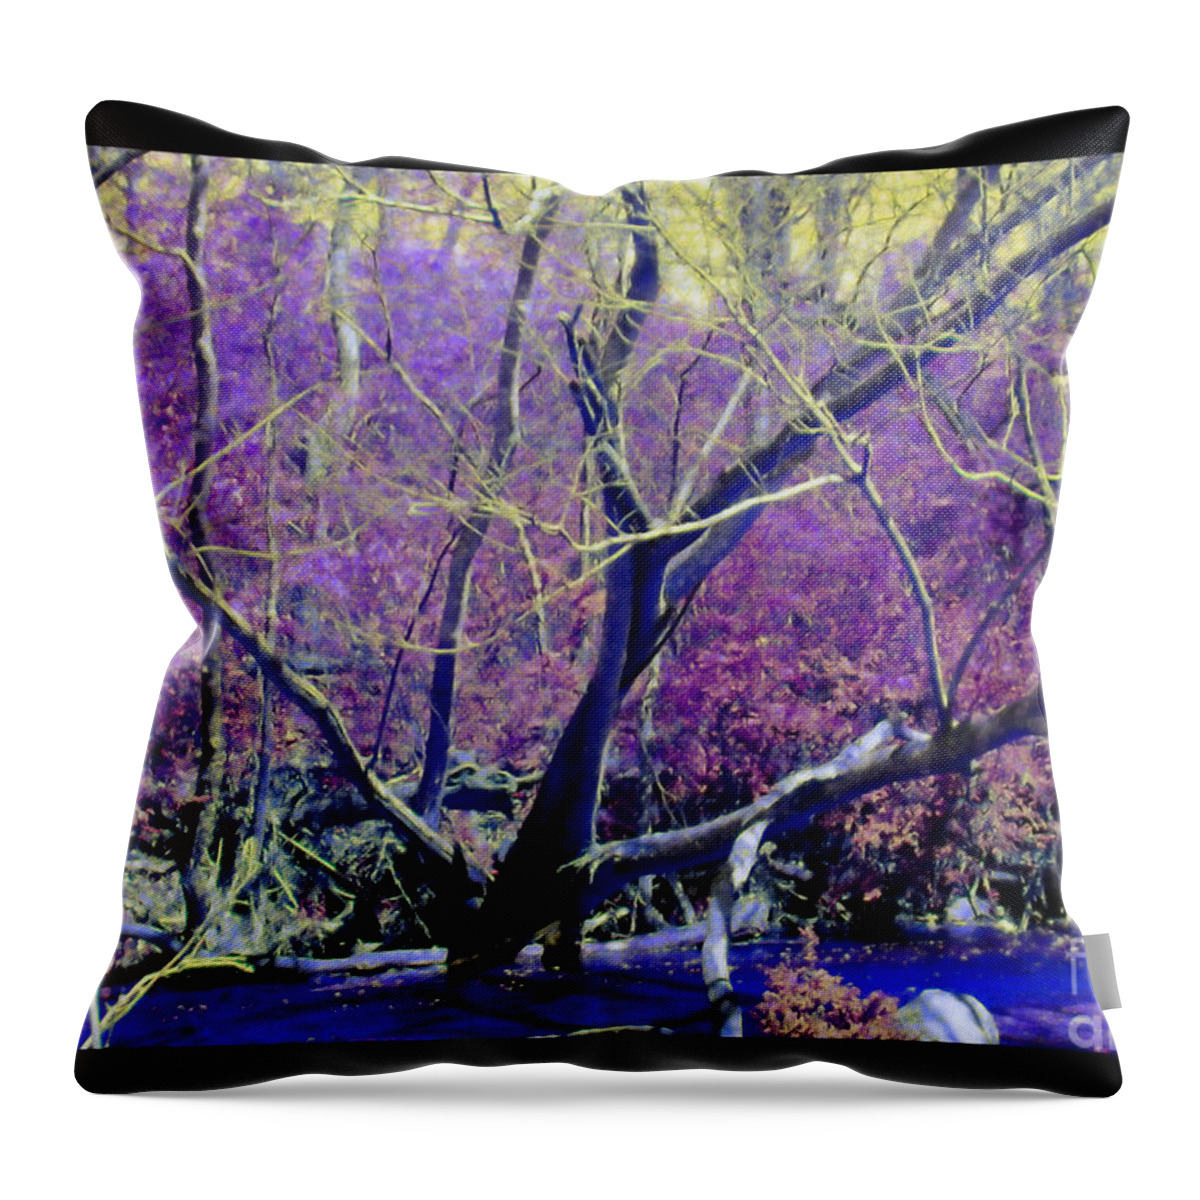  Throw Pillow featuring the photograph Wild Branches by Shirley Moravec